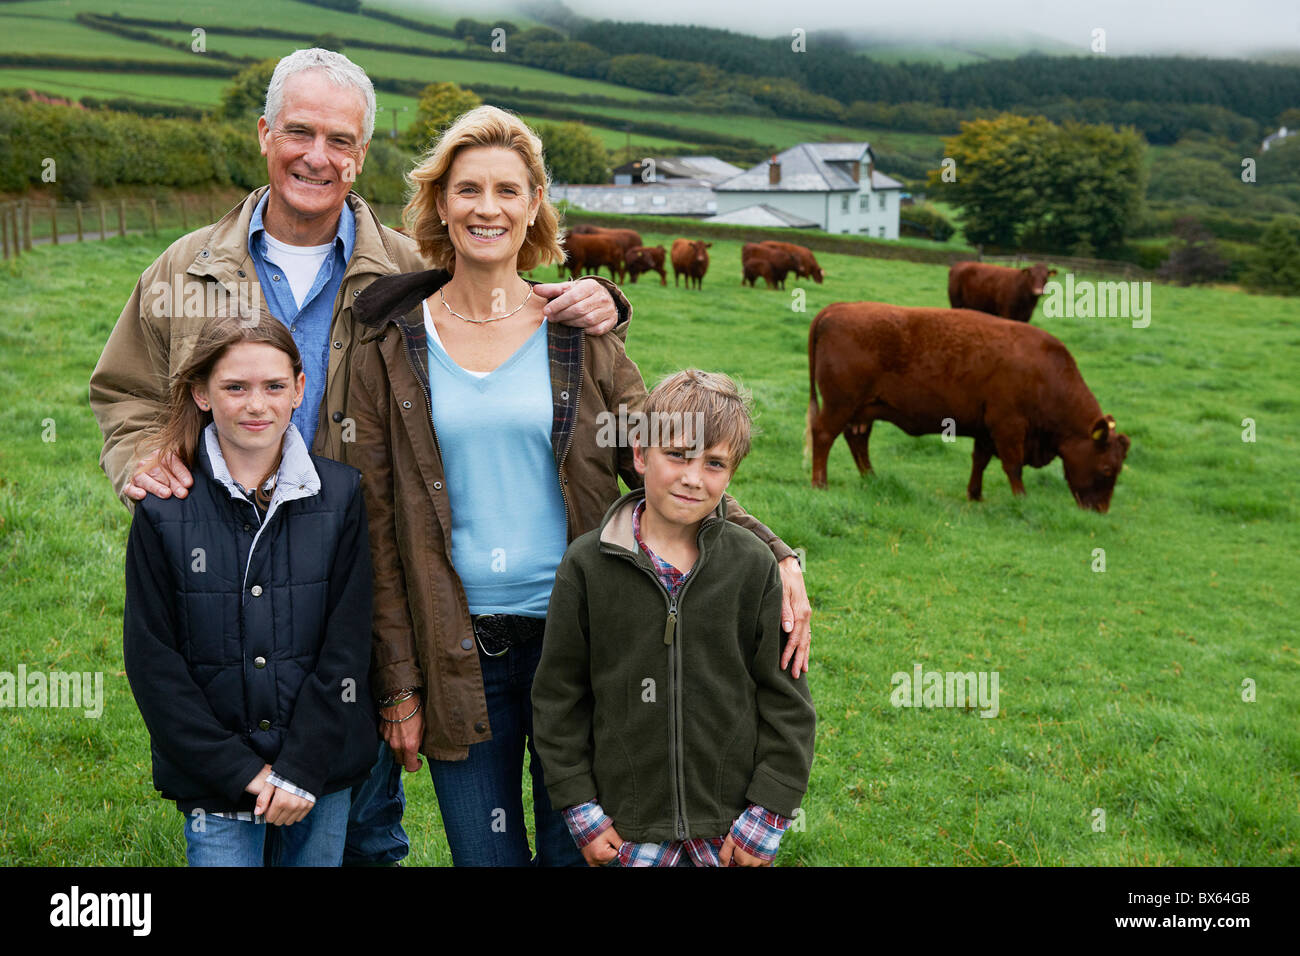 Family on farm in a field with cows Stock Photo